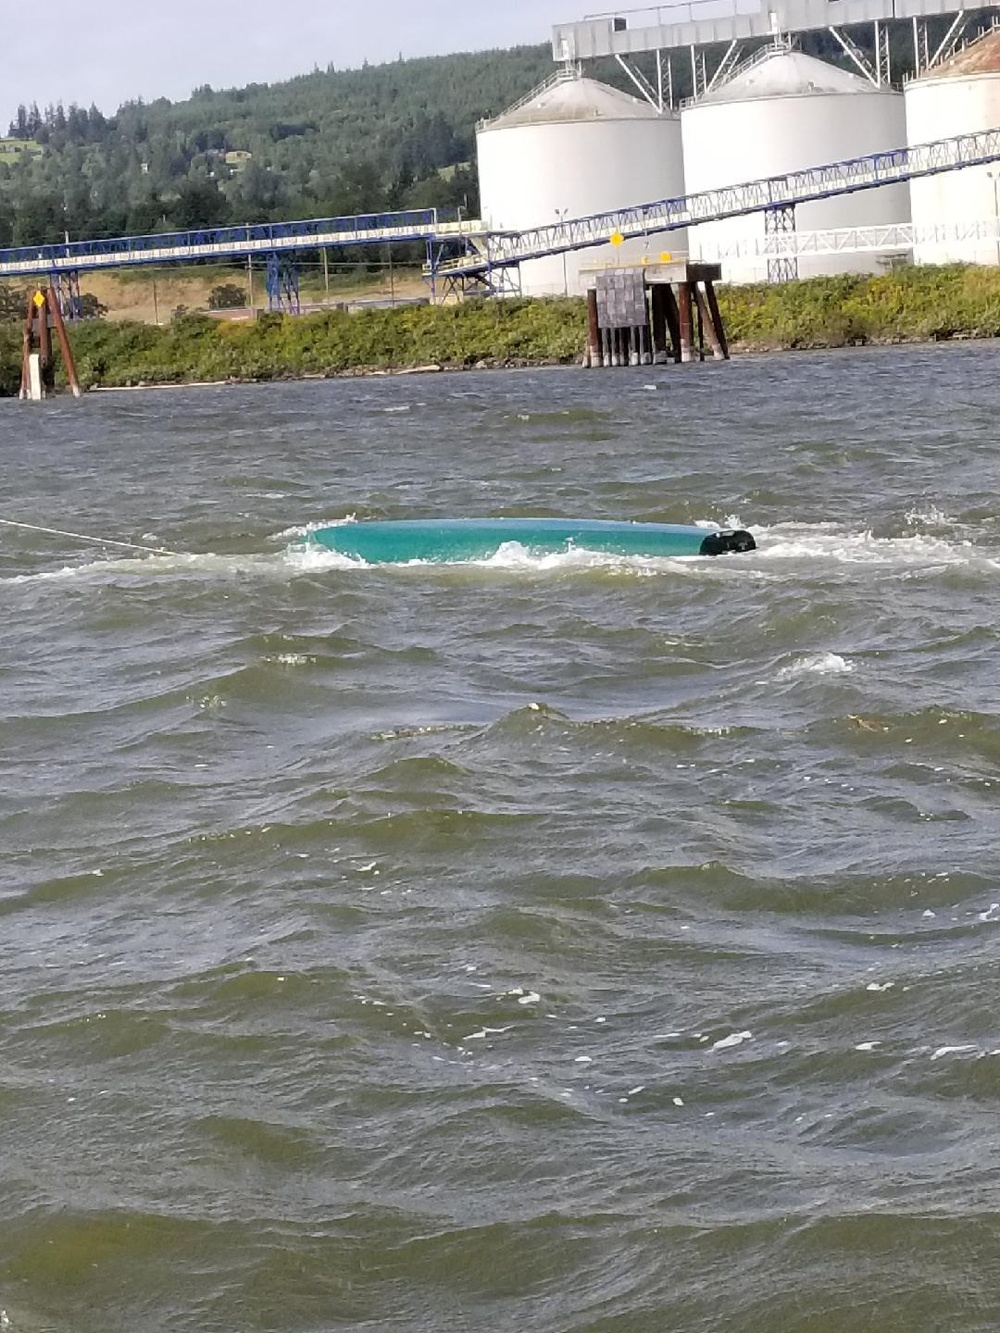 Coast Guard rescues boater after sailing vessel capsizes on the Columbia River near Deer Park, Oregon